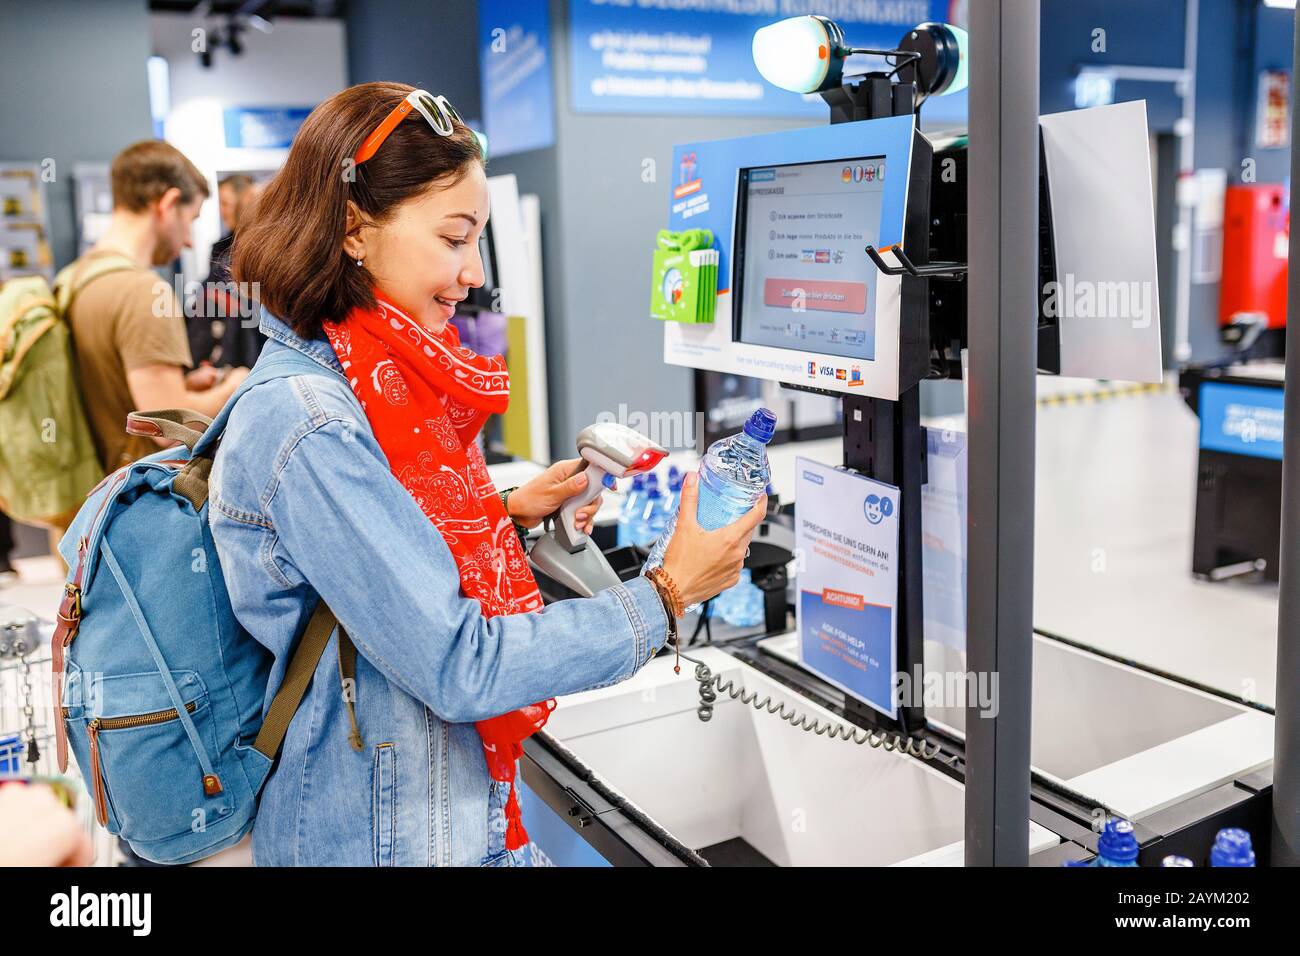 17 MAY 2018, DECATHLON, BERLIN, GERMANY: happy woman buying bottle of water  at supermarket self-service cash register Stock Photo - Alamy